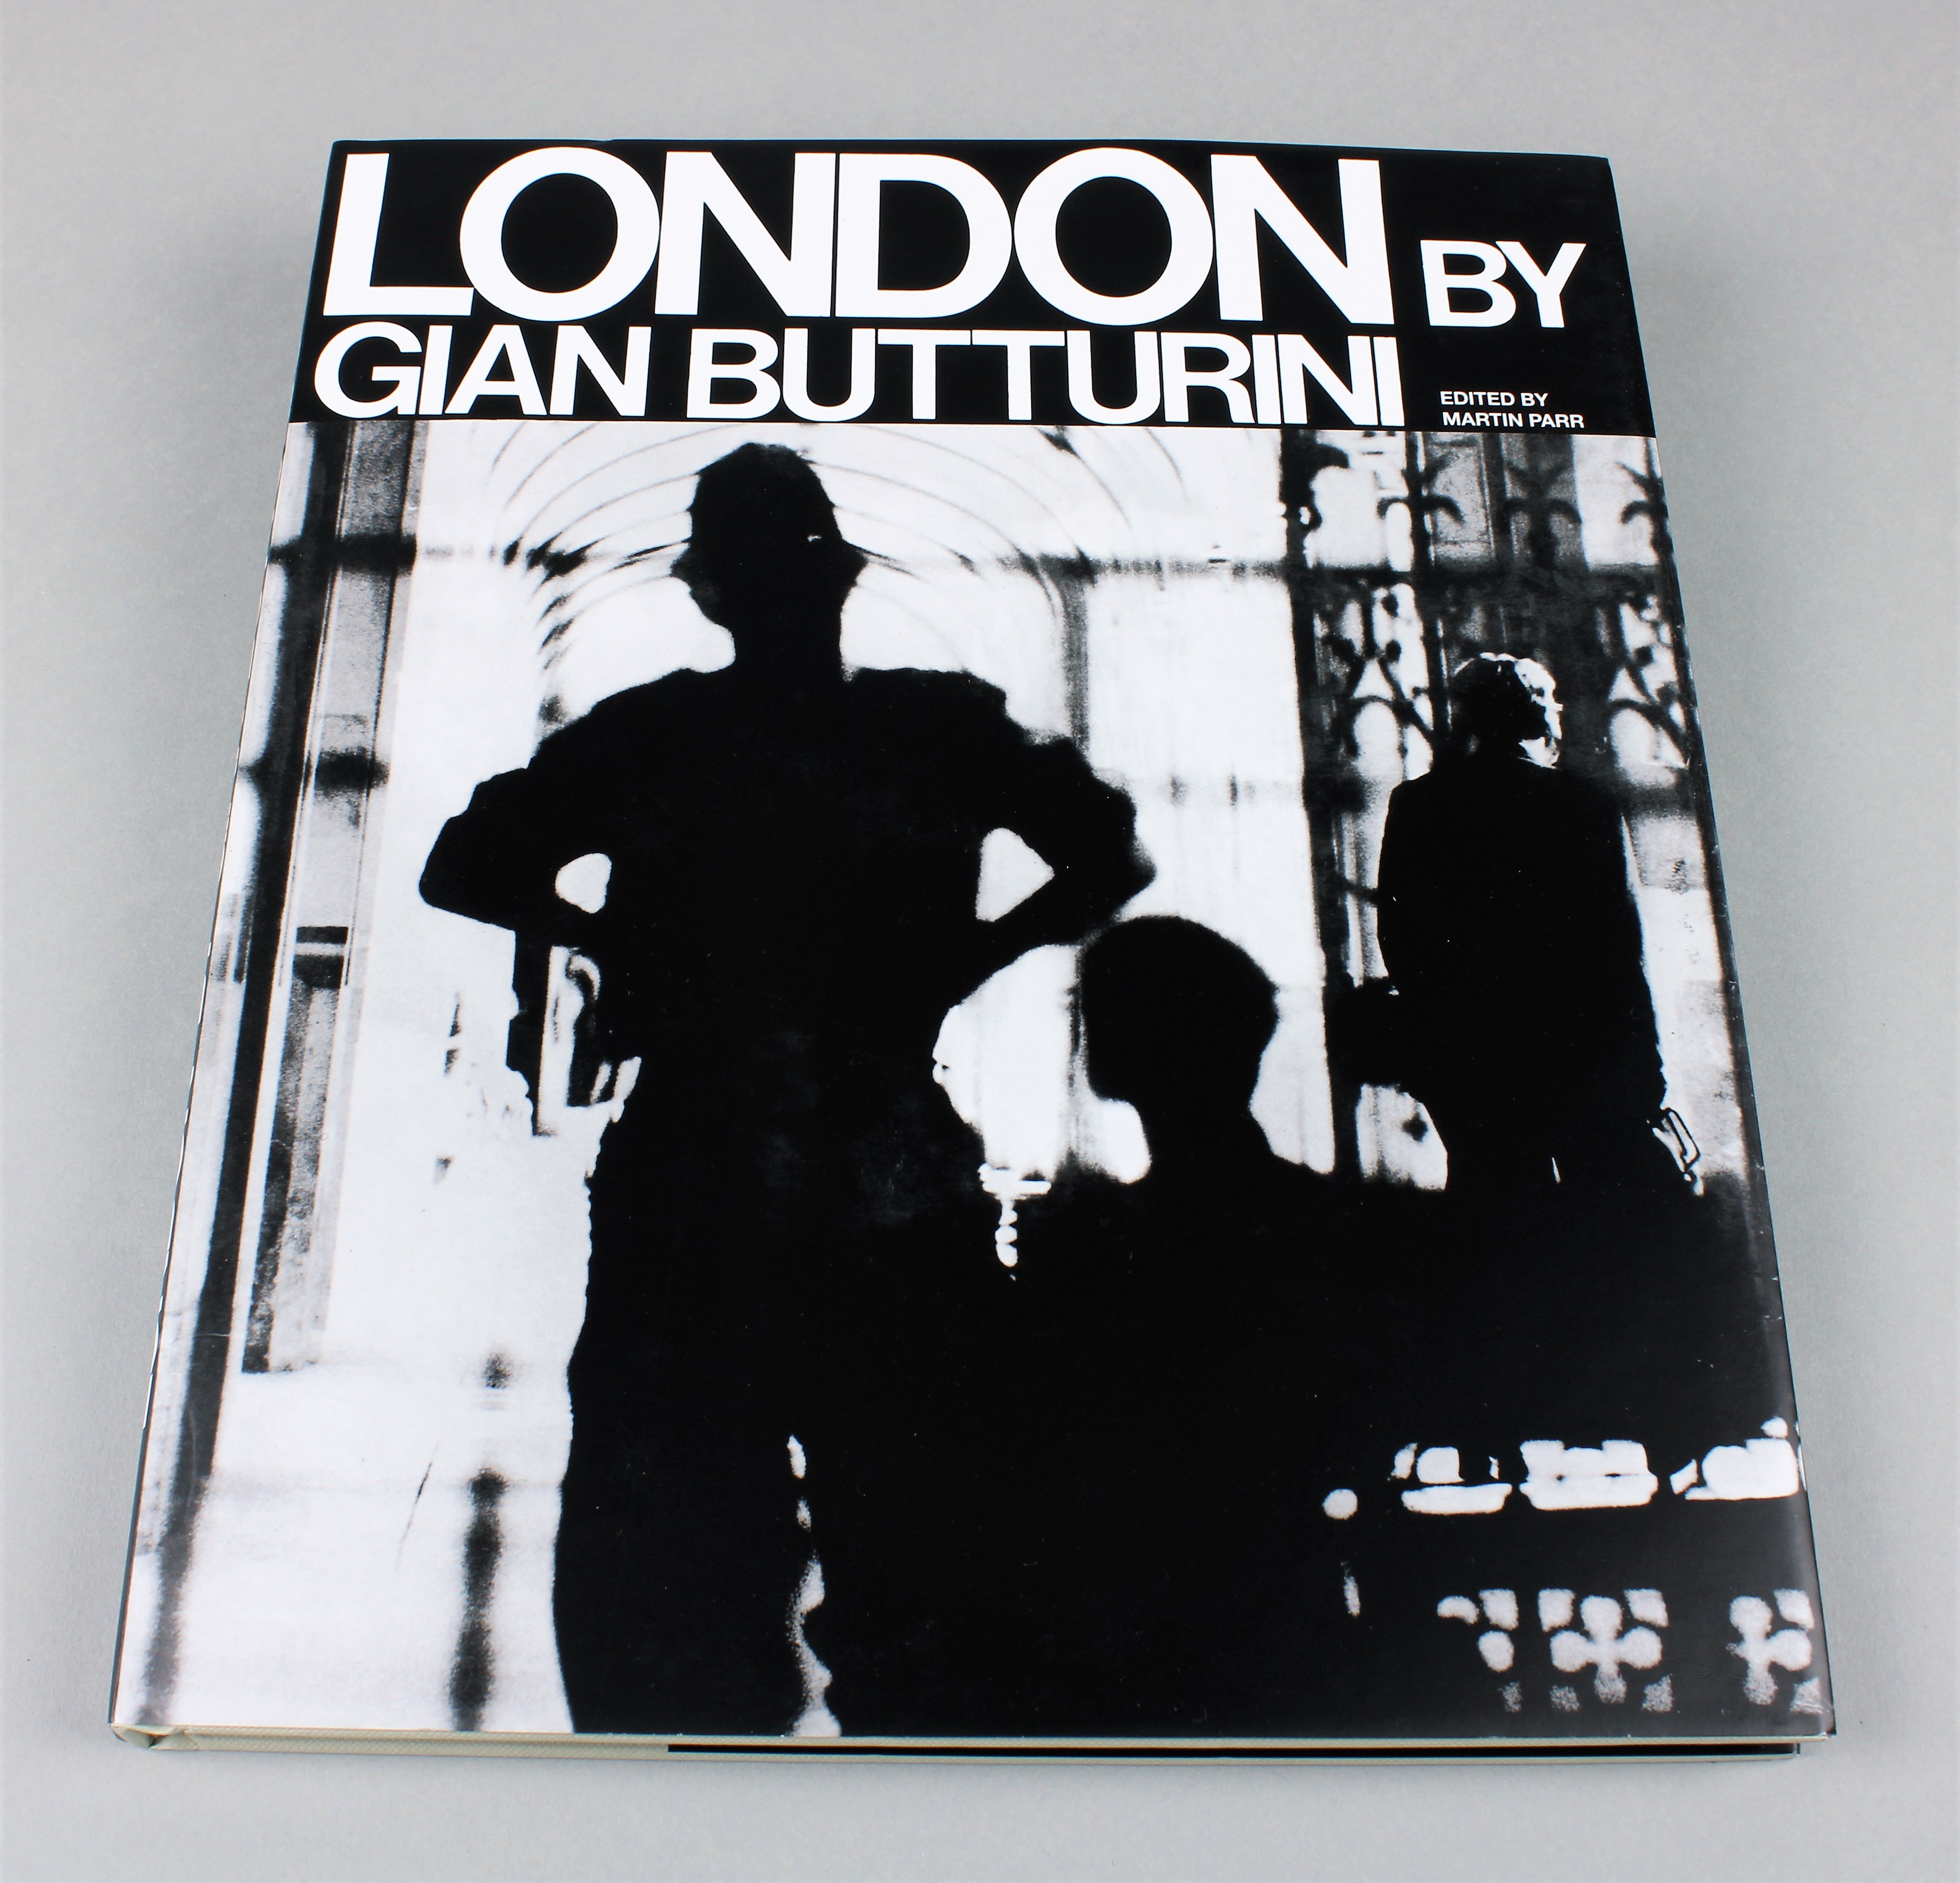 SAVE THE BOOK! LONDON by Gian Butturini Edited by Martin Parr  DAMIANI 2017 